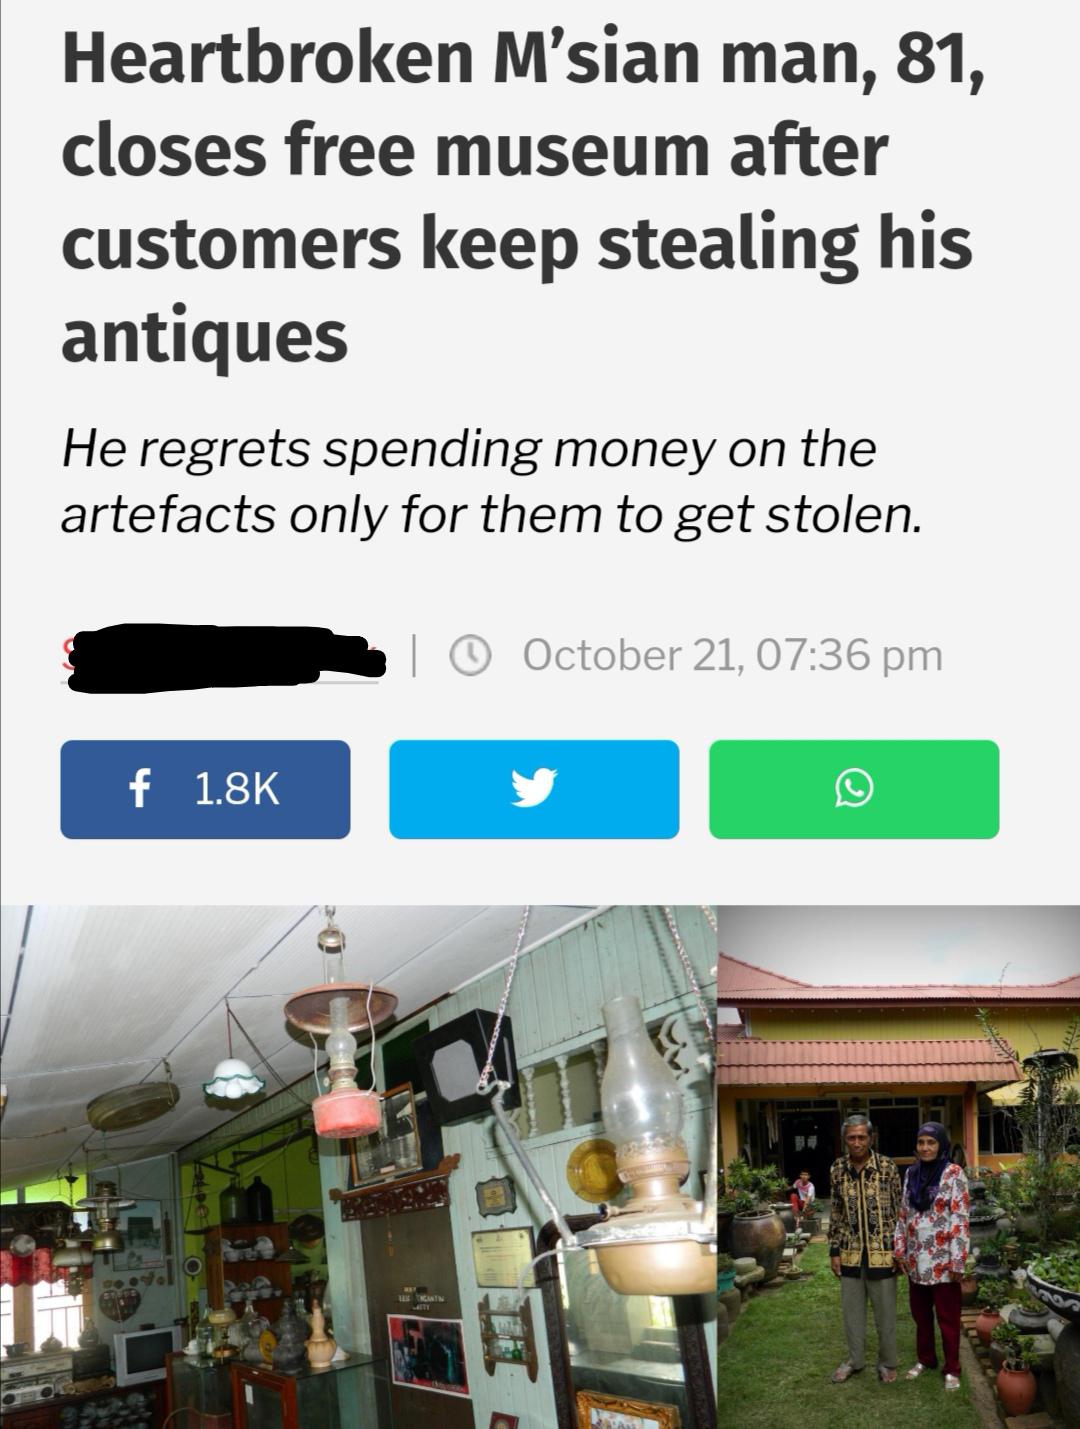 Heartbroken M'sian man, 81, closes free museum after customers keep stealing his antiques He regrets spending money on the artefacts only for them to get stolen. October 21, f